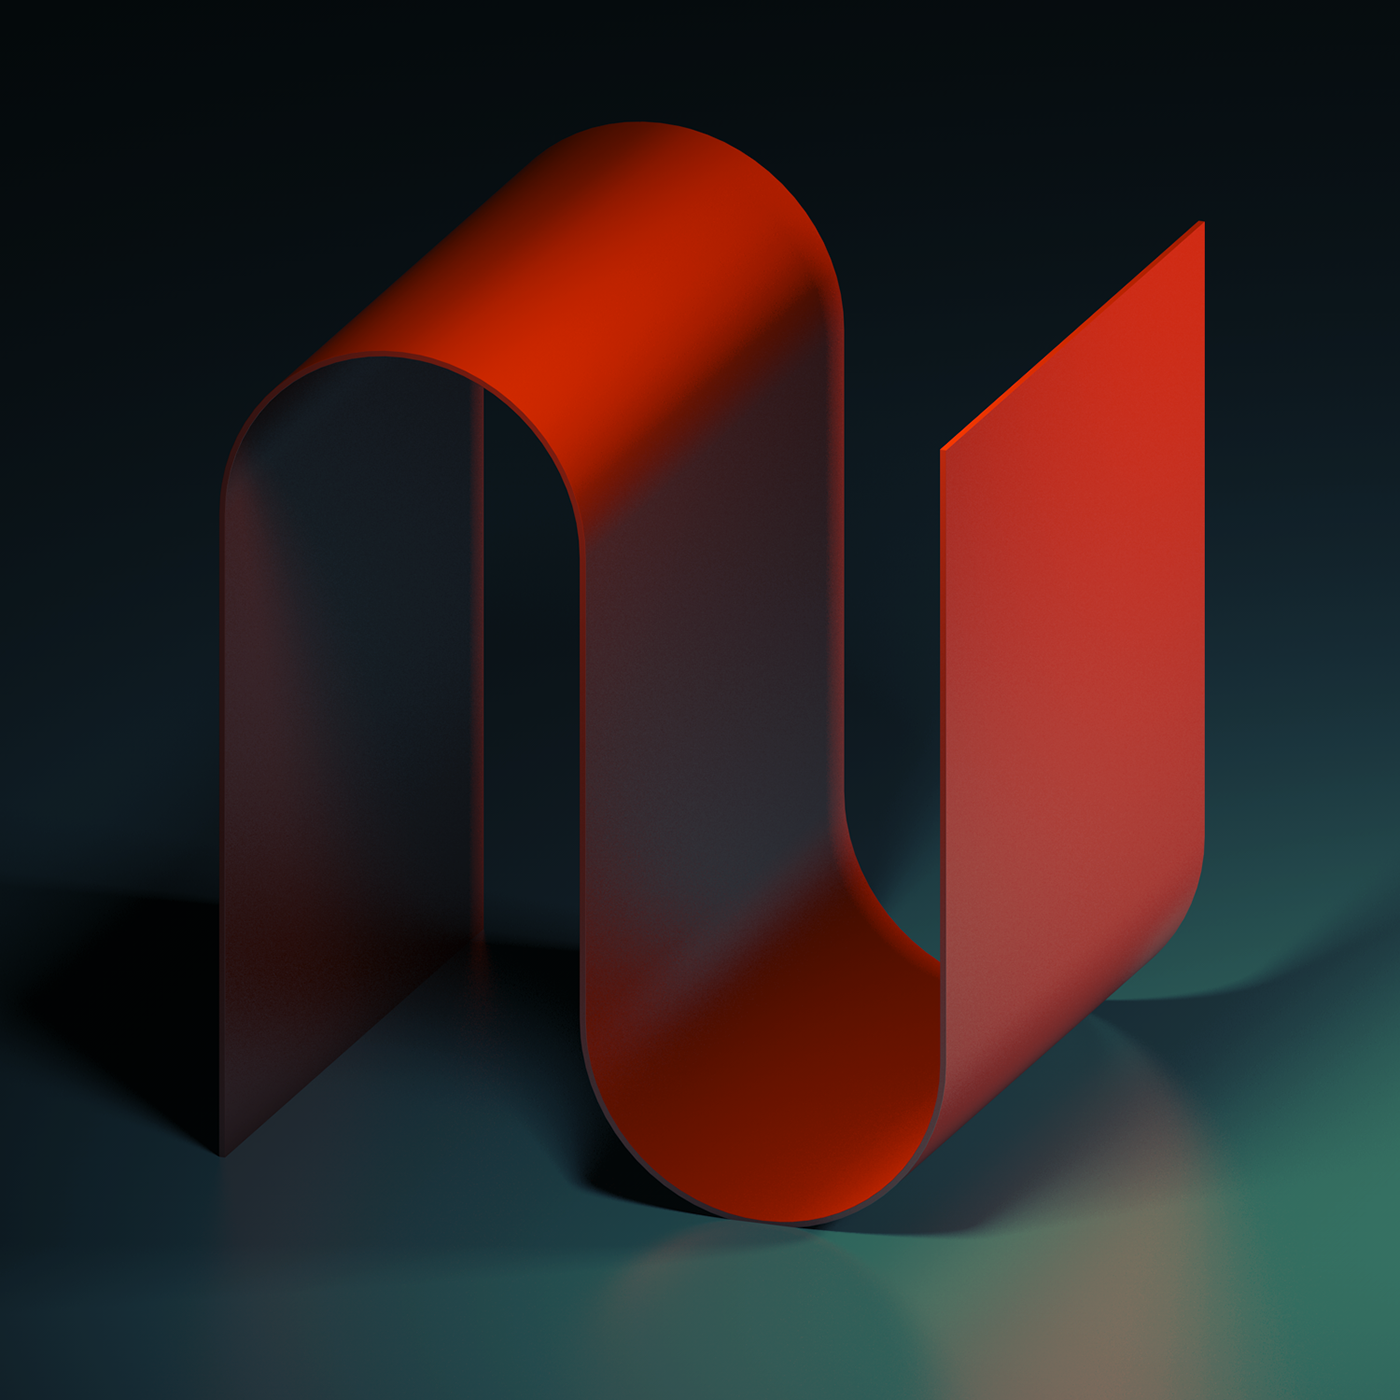 IIlustration typography   3D letters alphabet numbers type 36daysoftype graphic design 